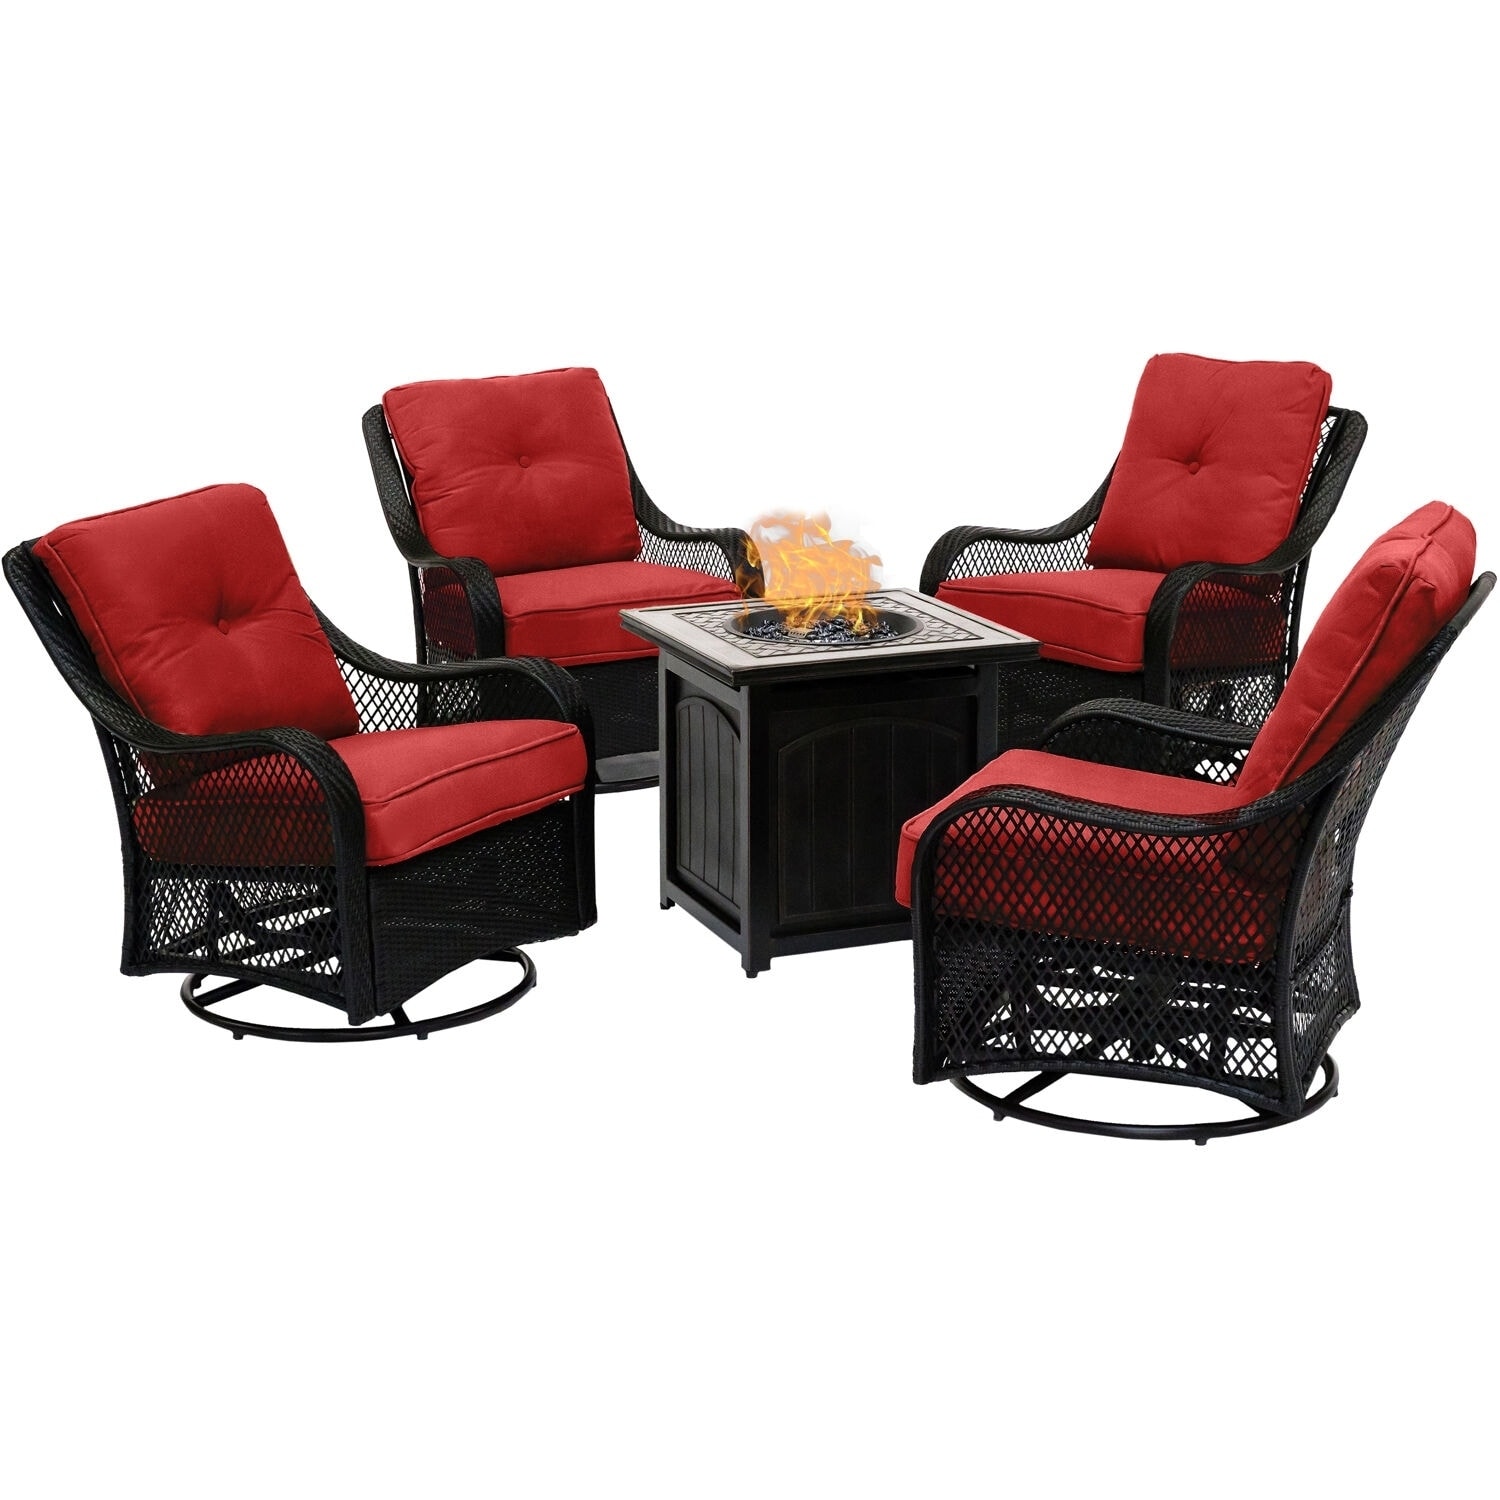 Hanover Orleans 5-piece Fire Pit Chat Set In Autumn Berry With 4 Woven Swivel Gliders And A 26-in. Square Fire Pit Table